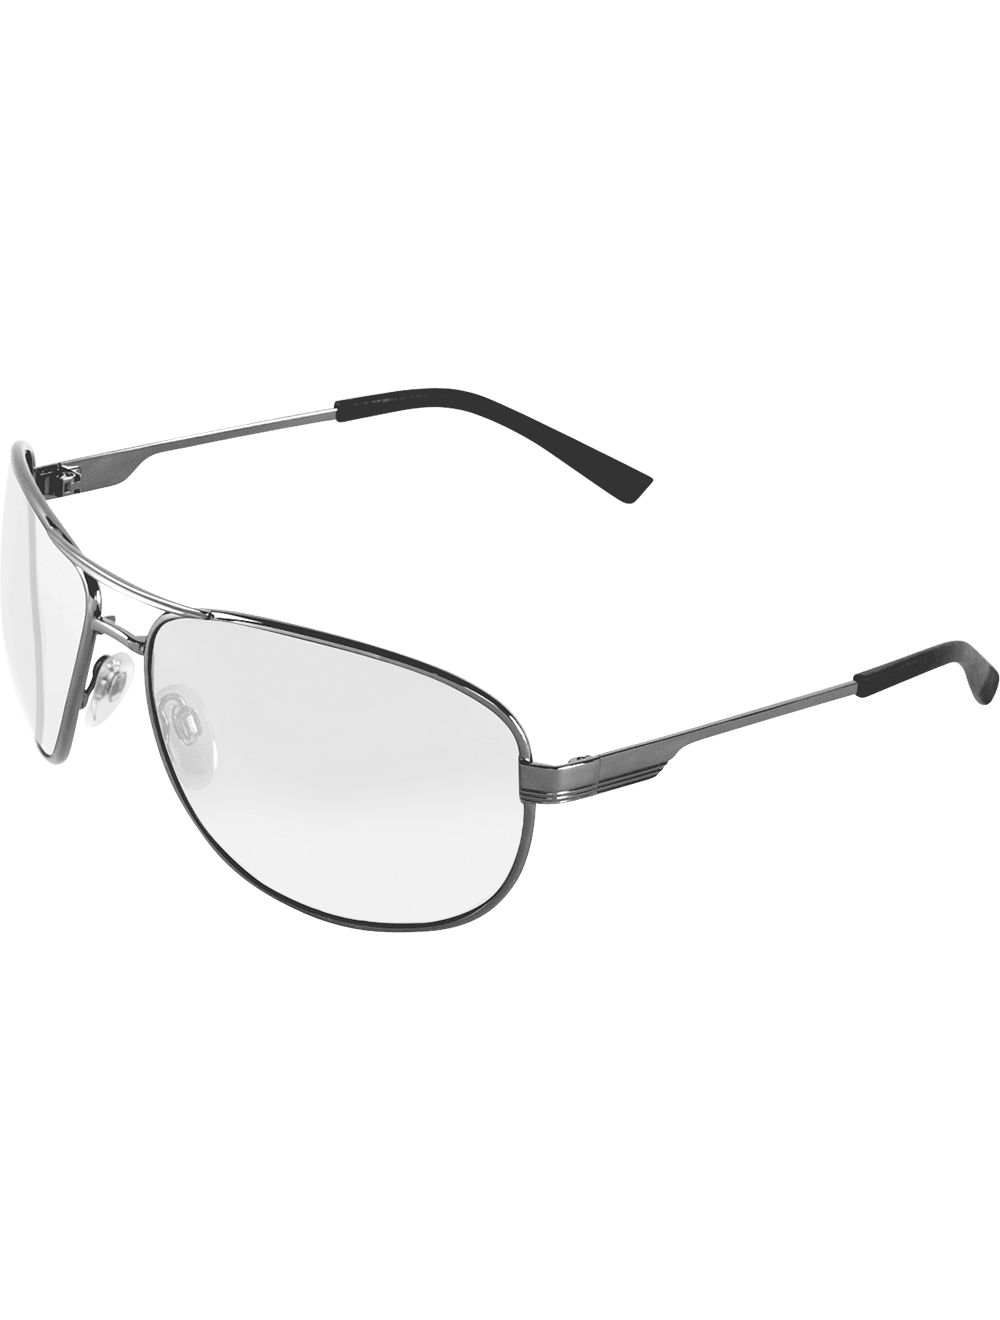 Acero® Clear Lens, Gunmetal Frame Safety Glasses - LIMITED STOCK - BH24211